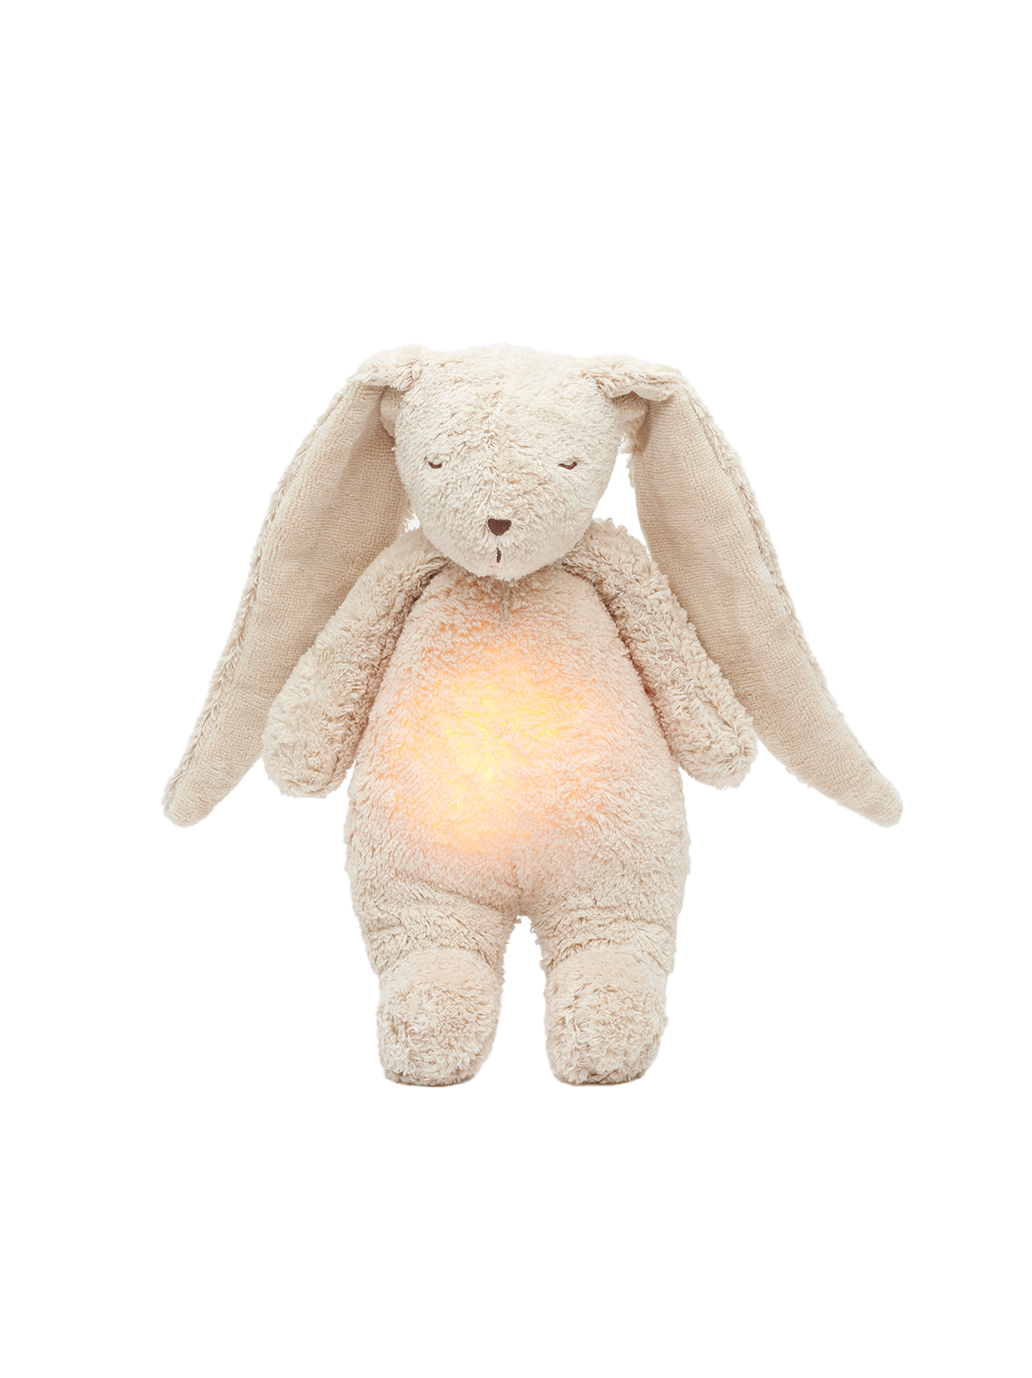 Organic humming bunny with a lamp